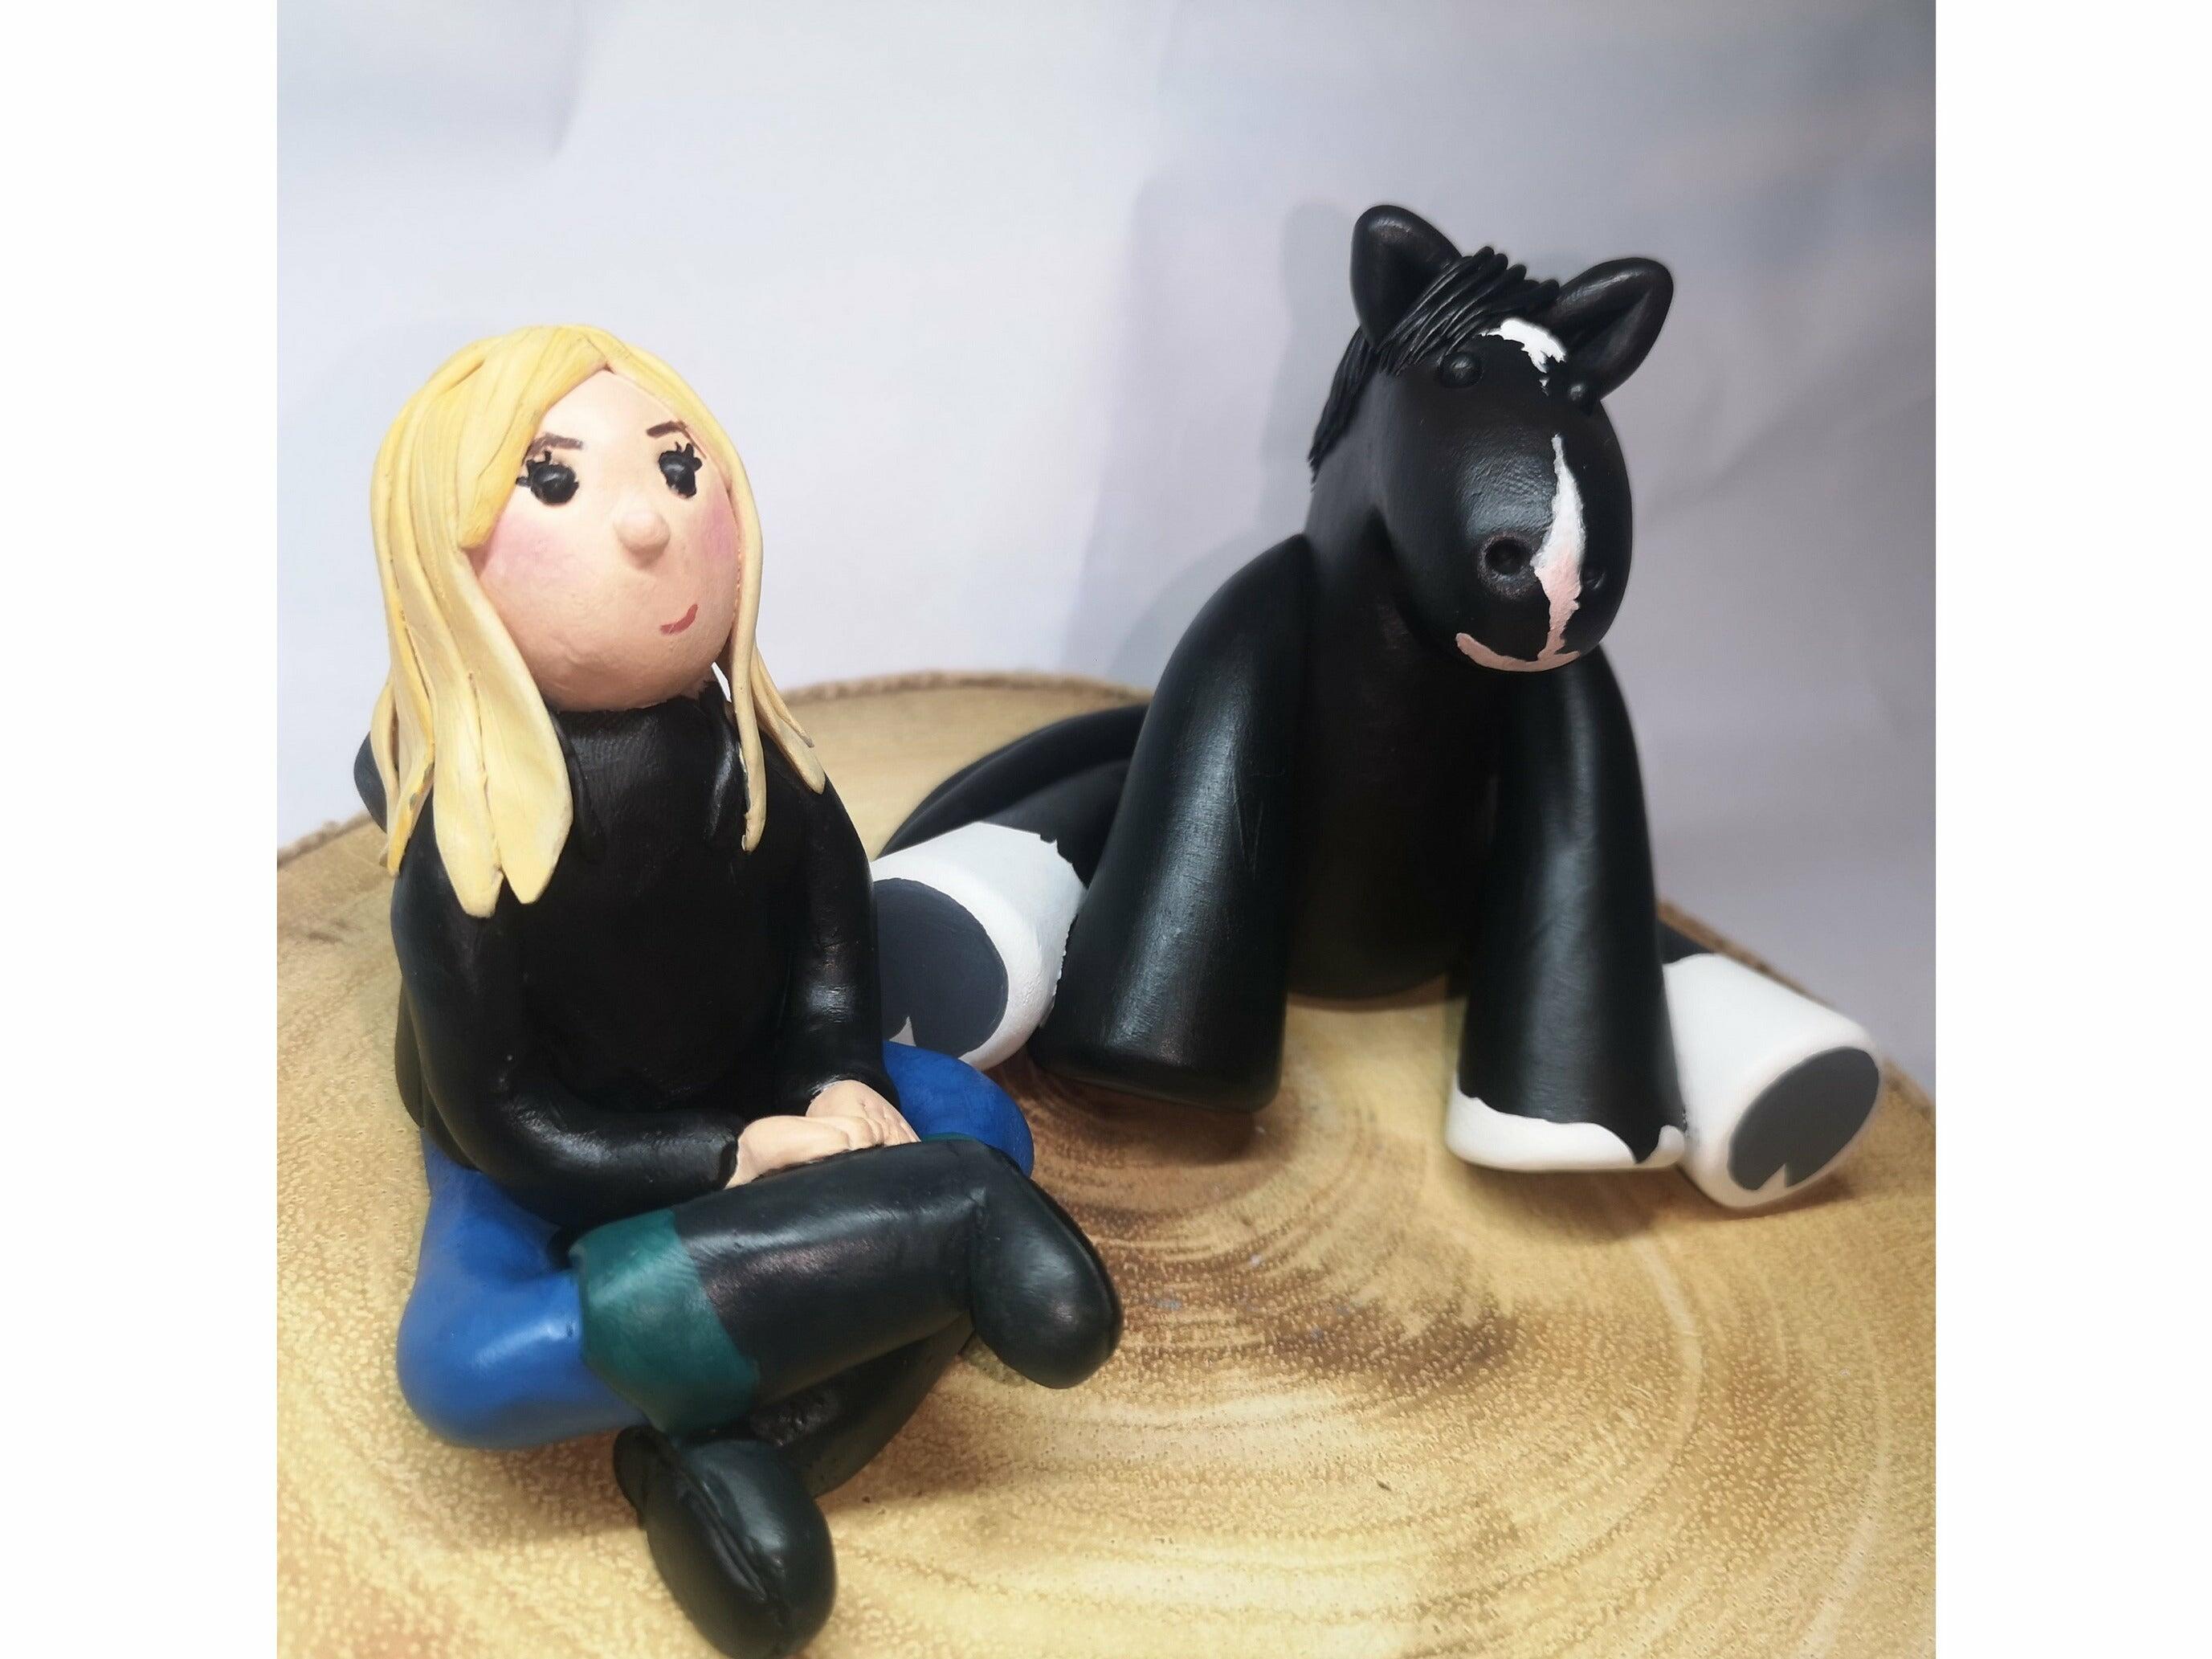 A clay model of a blonde girl in stable gear sitting next to a black cob